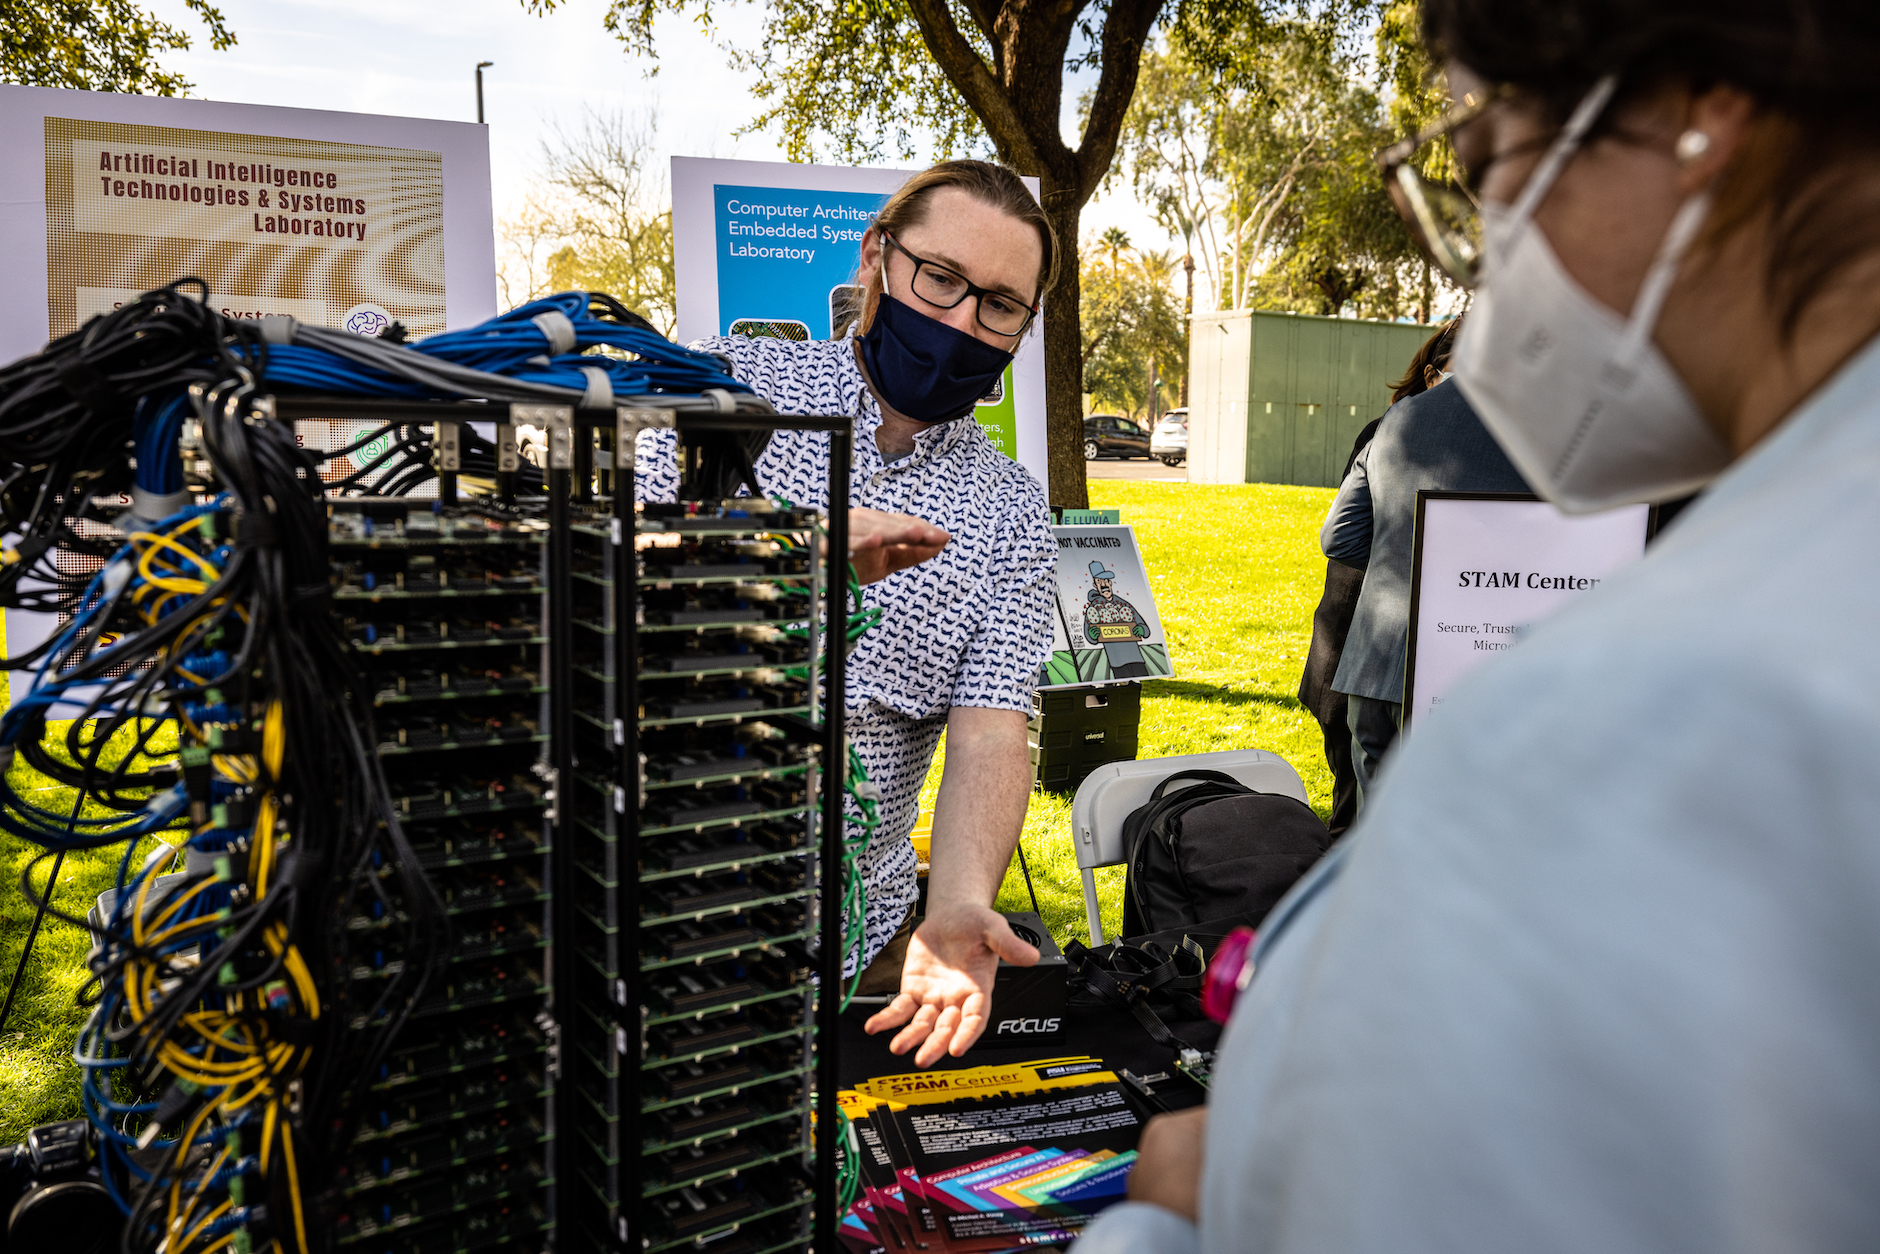 ASU's commitment to innovation front and center at Arizona Capitol - ASU News Now